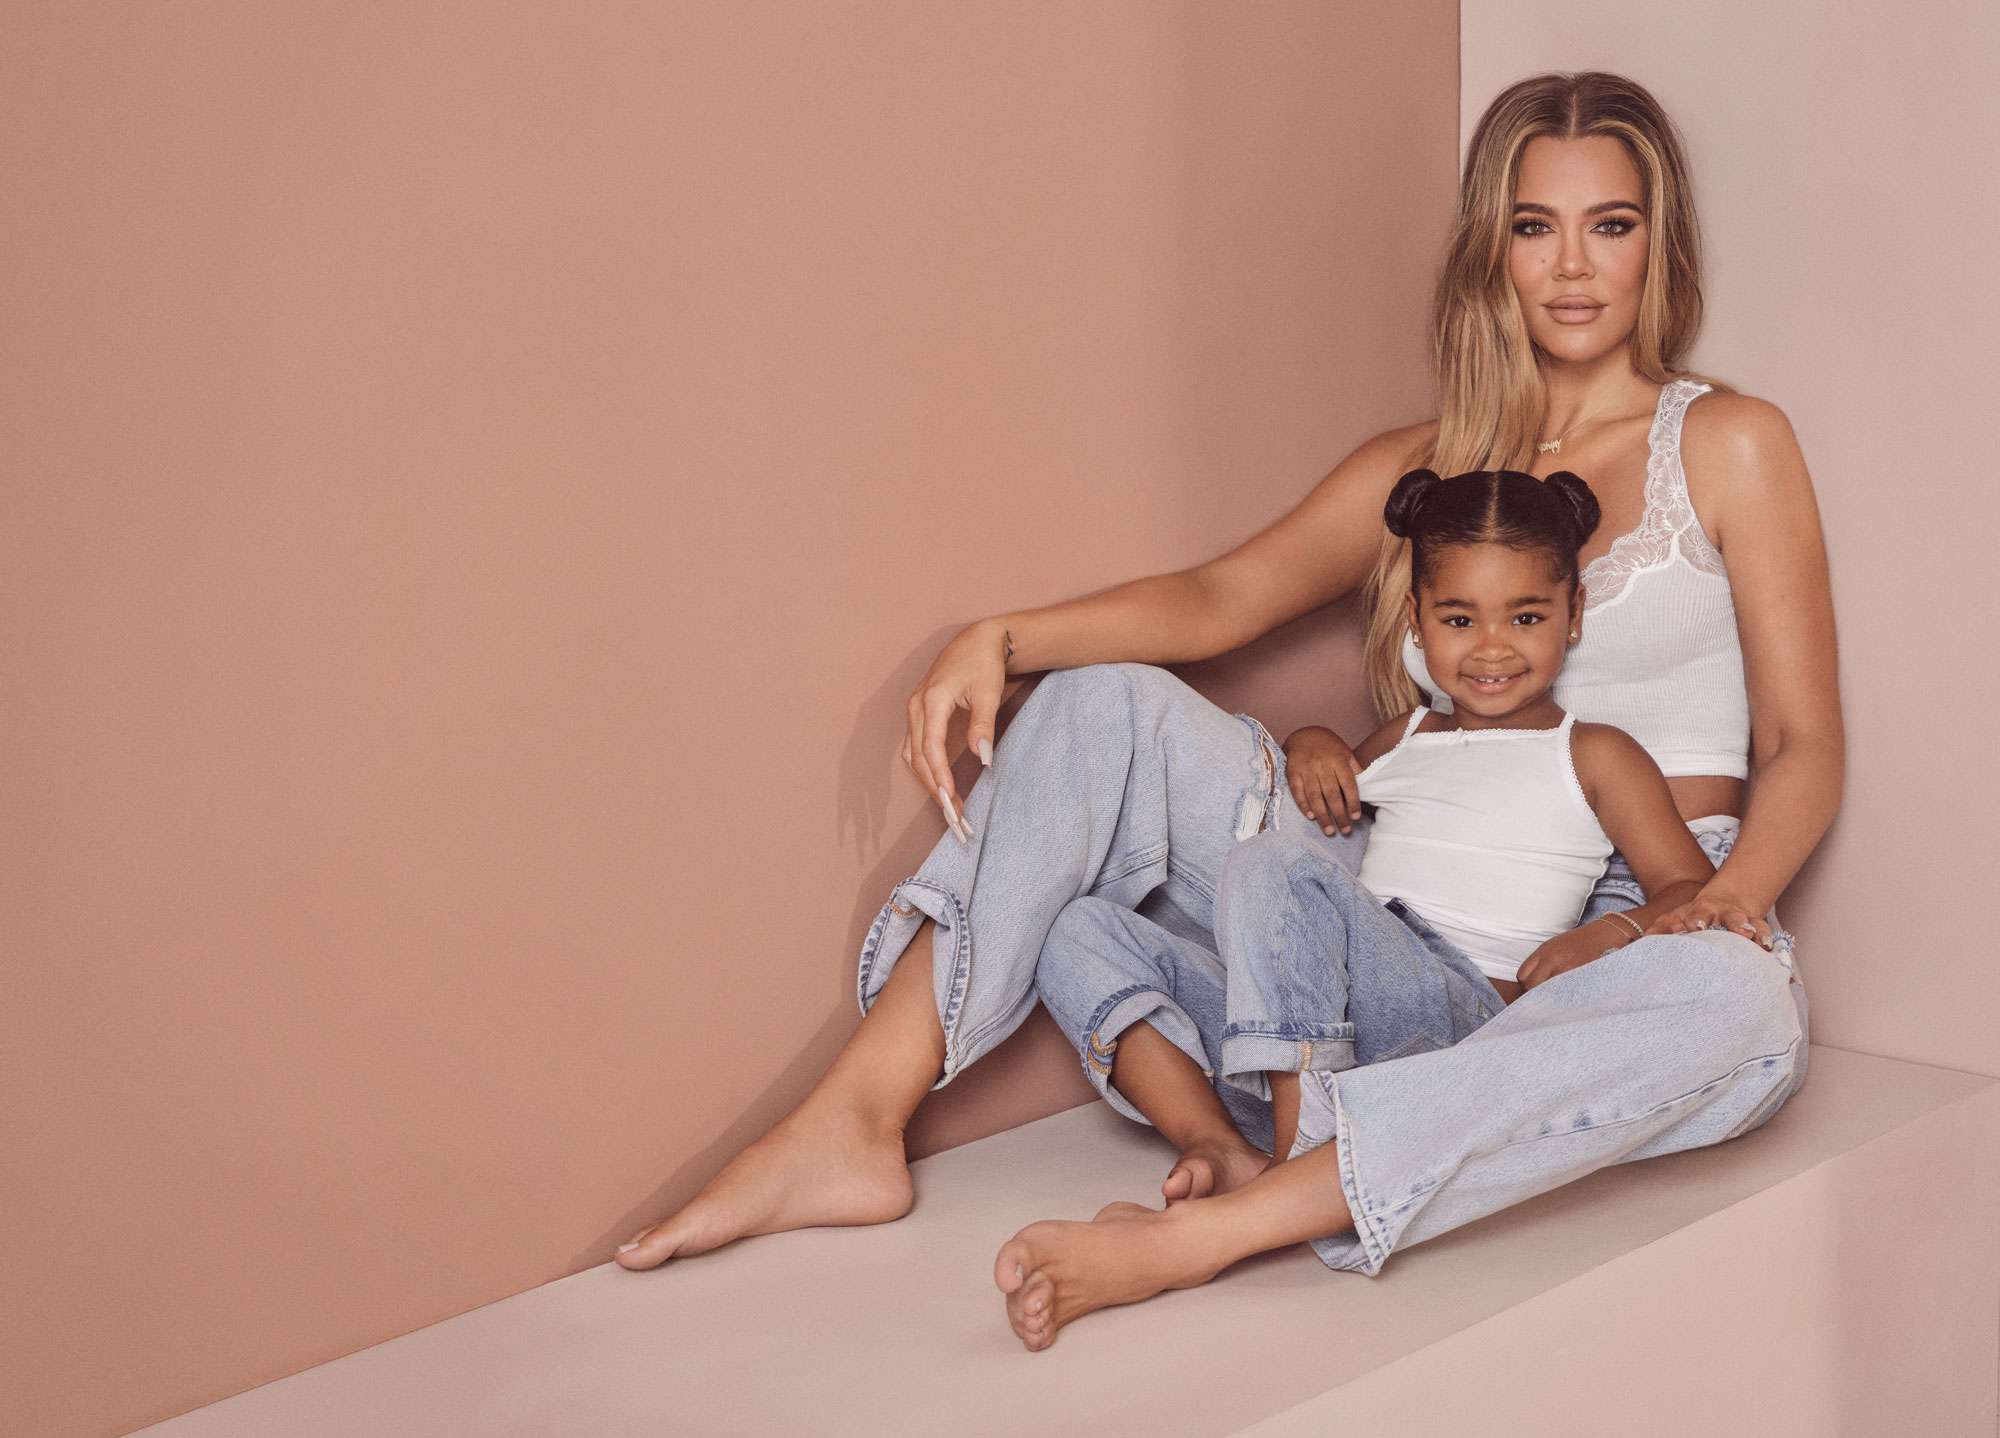 Khloe Kardashian and Tristan Thompson's Son Joins the 'T' Clan with Traditional Family Name